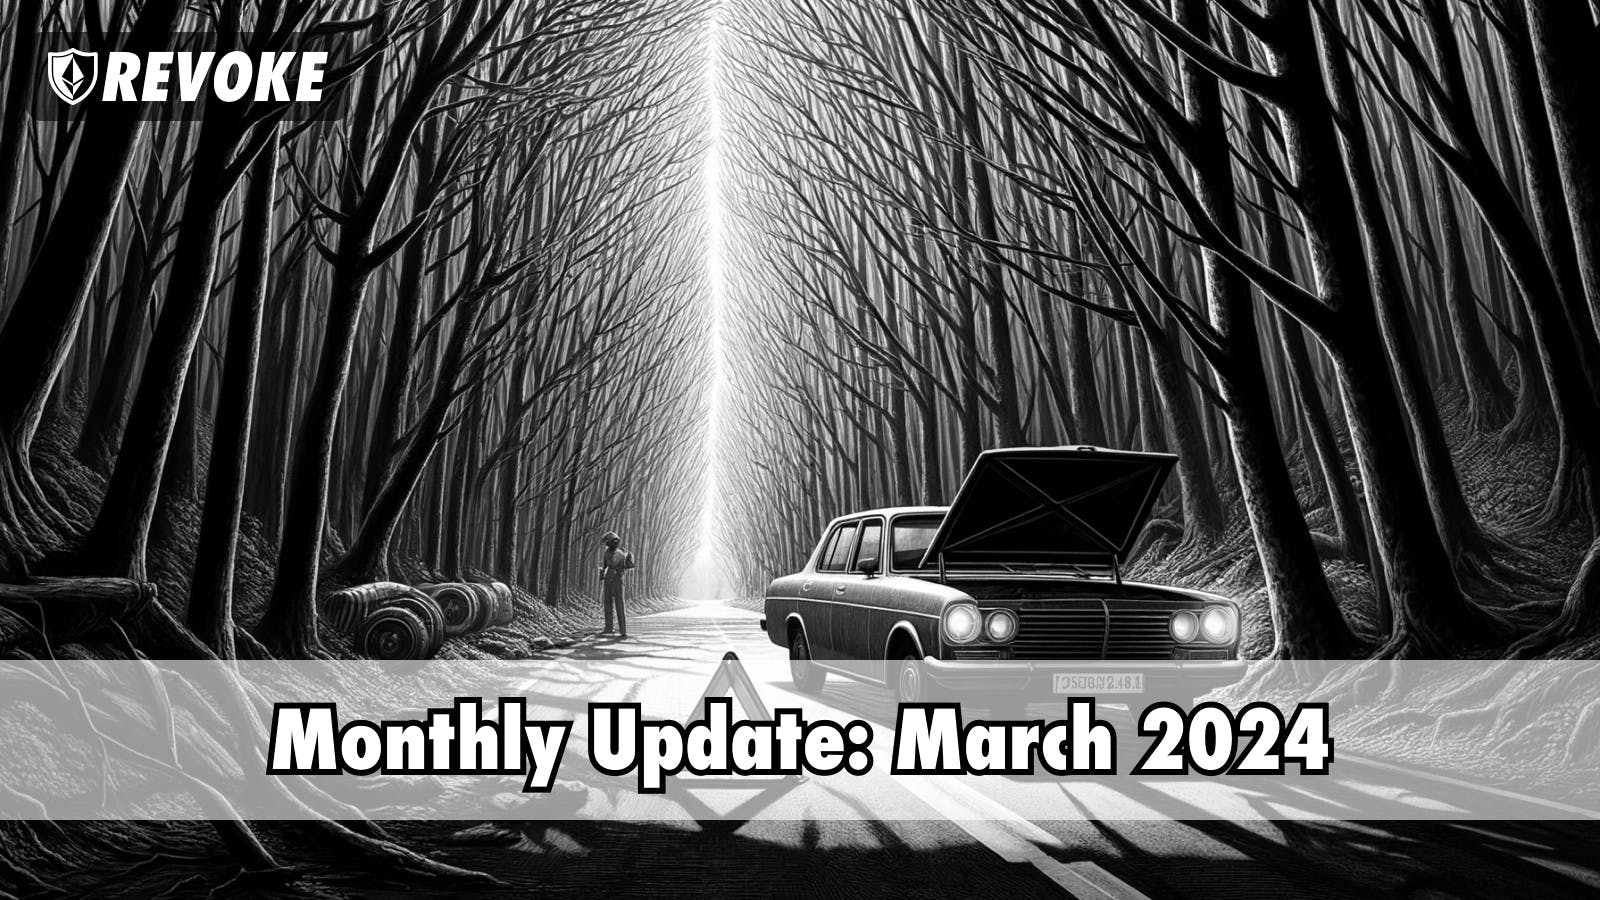 Monthly Update: March 2024 Cover Image